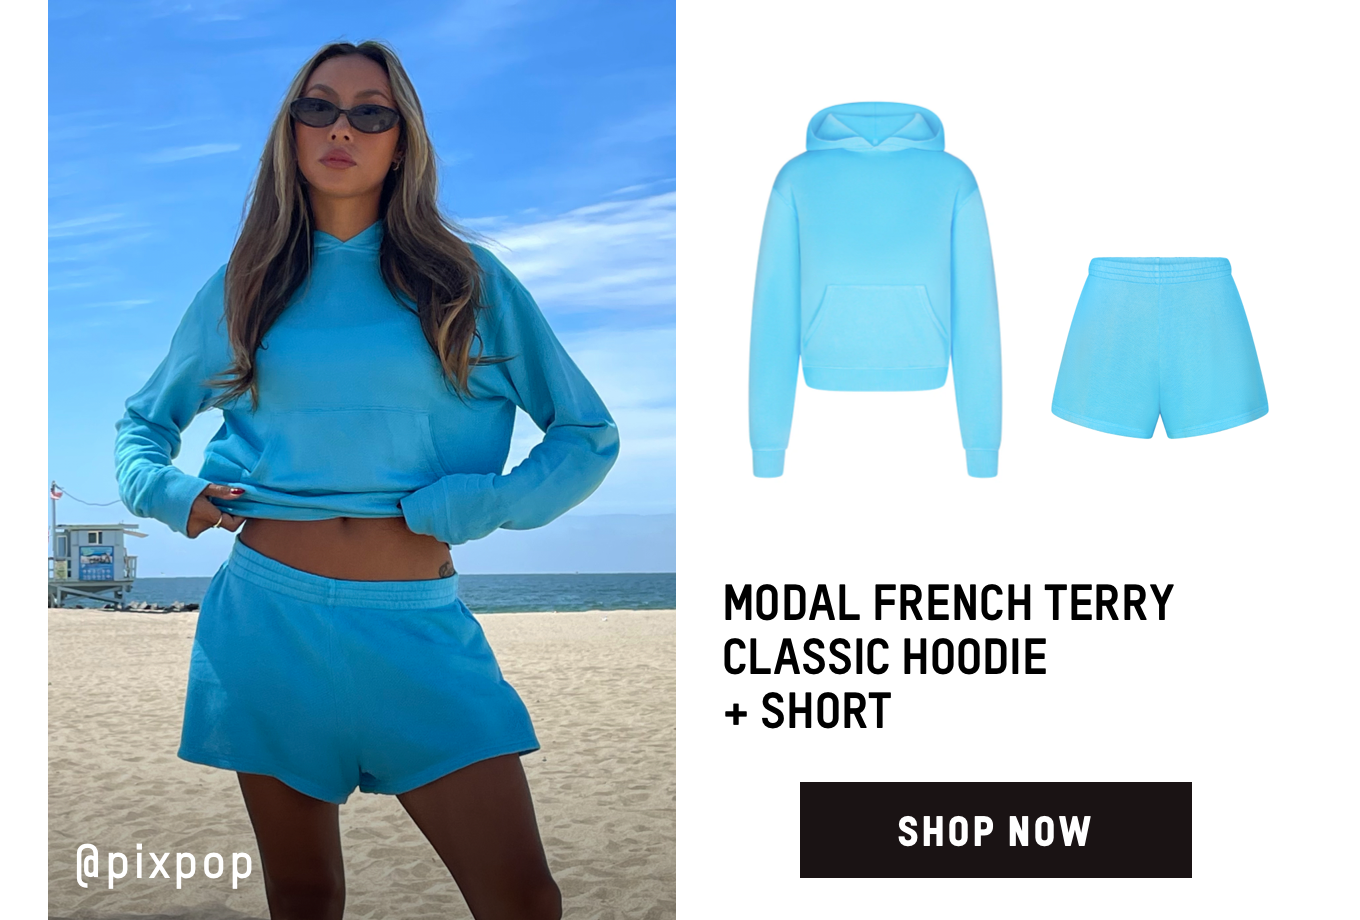 MODAL FRENCH TERRY CLASSIC HOODIE + SHORT